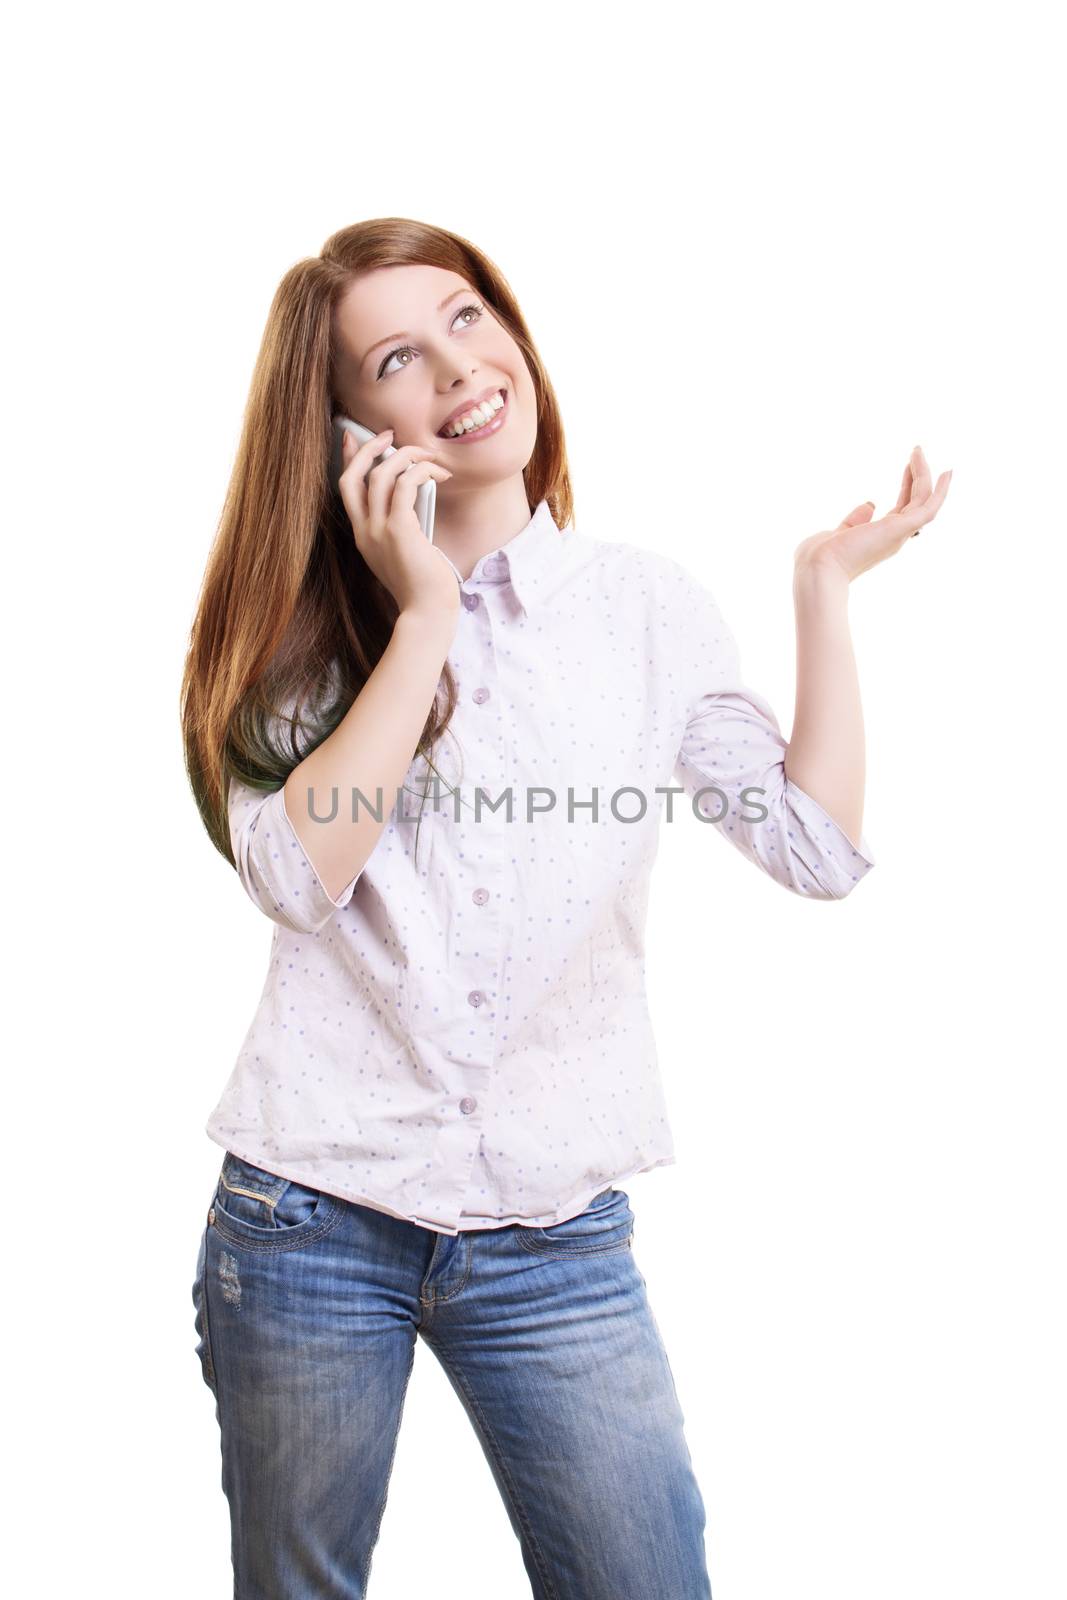 Smiling beautiful young woman in casual clothing talking on a phone and gesturing with one hand, isolated on white background.